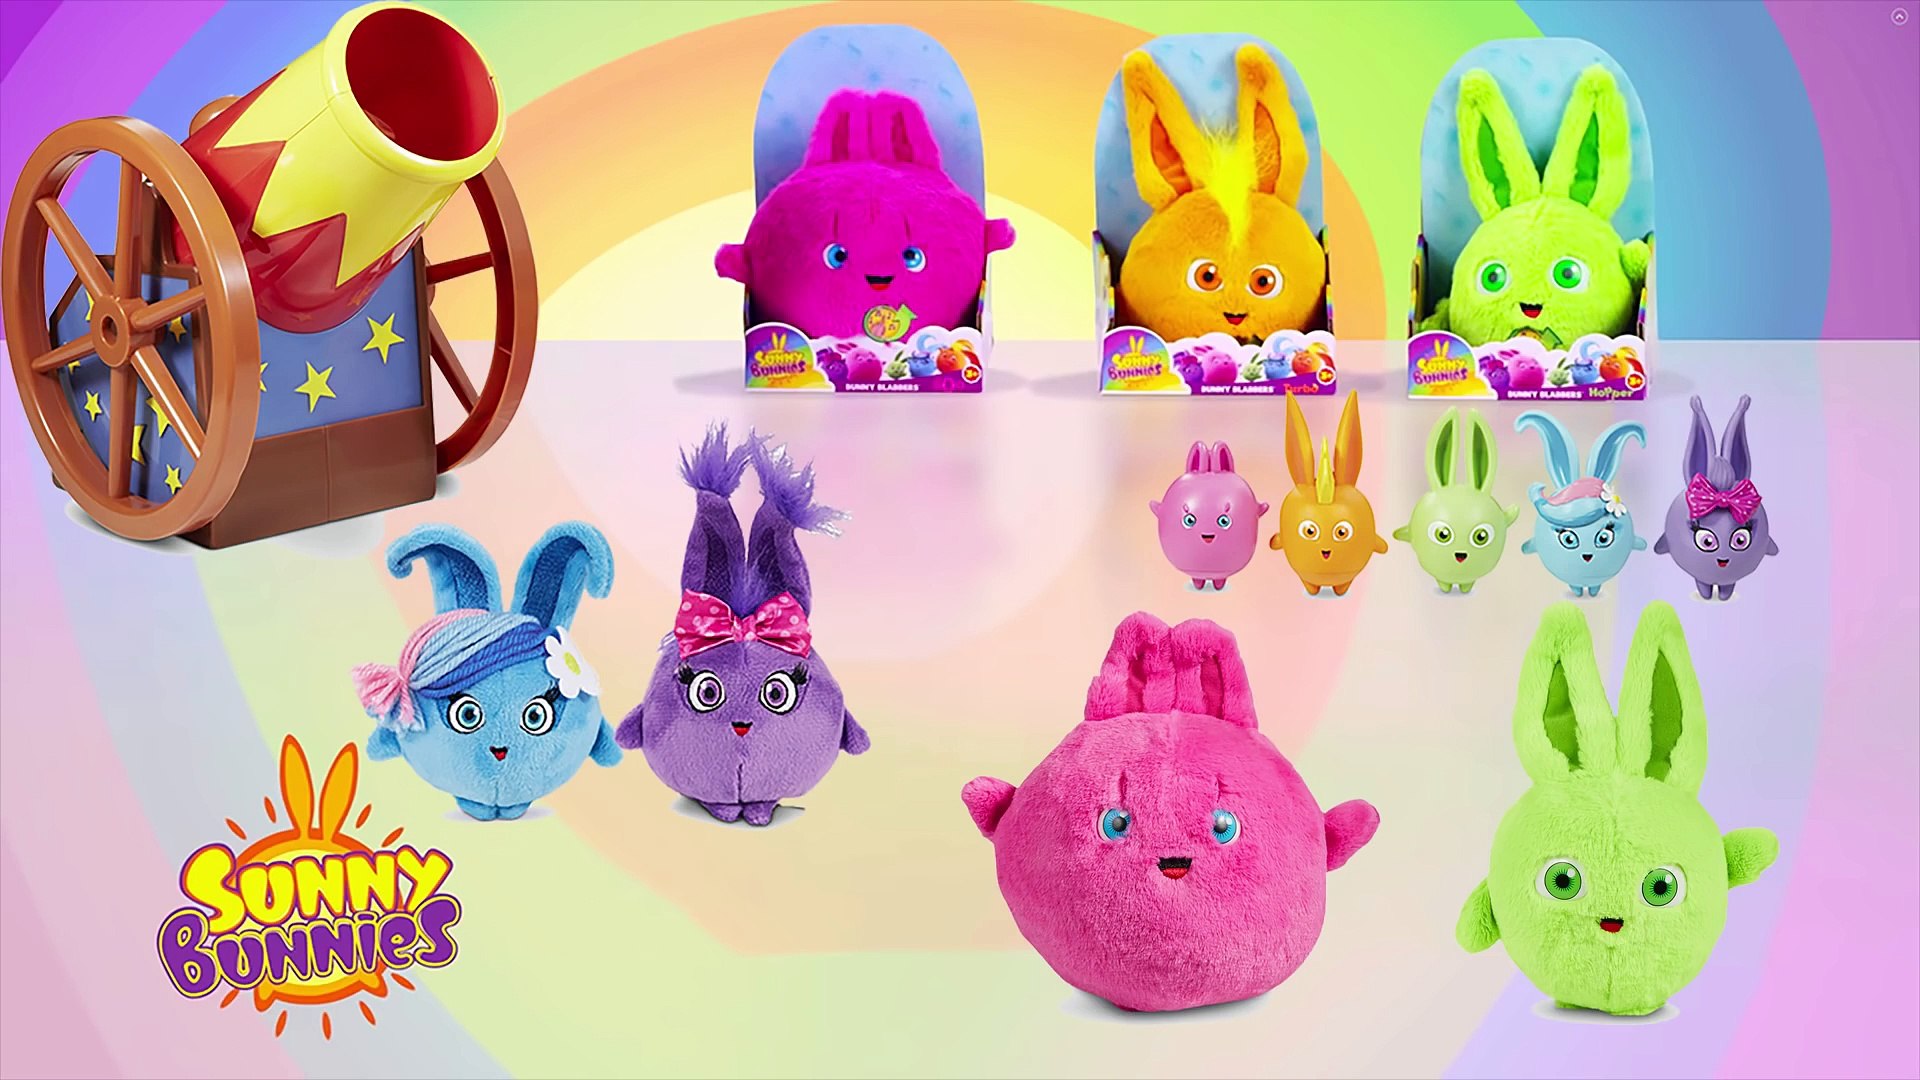 BRAND NEW - SUNNY BUNNIES Toyplay Stop Motion eps featuring Bunny Blabbers  & Cannon Playset toys - Dailymotion Video